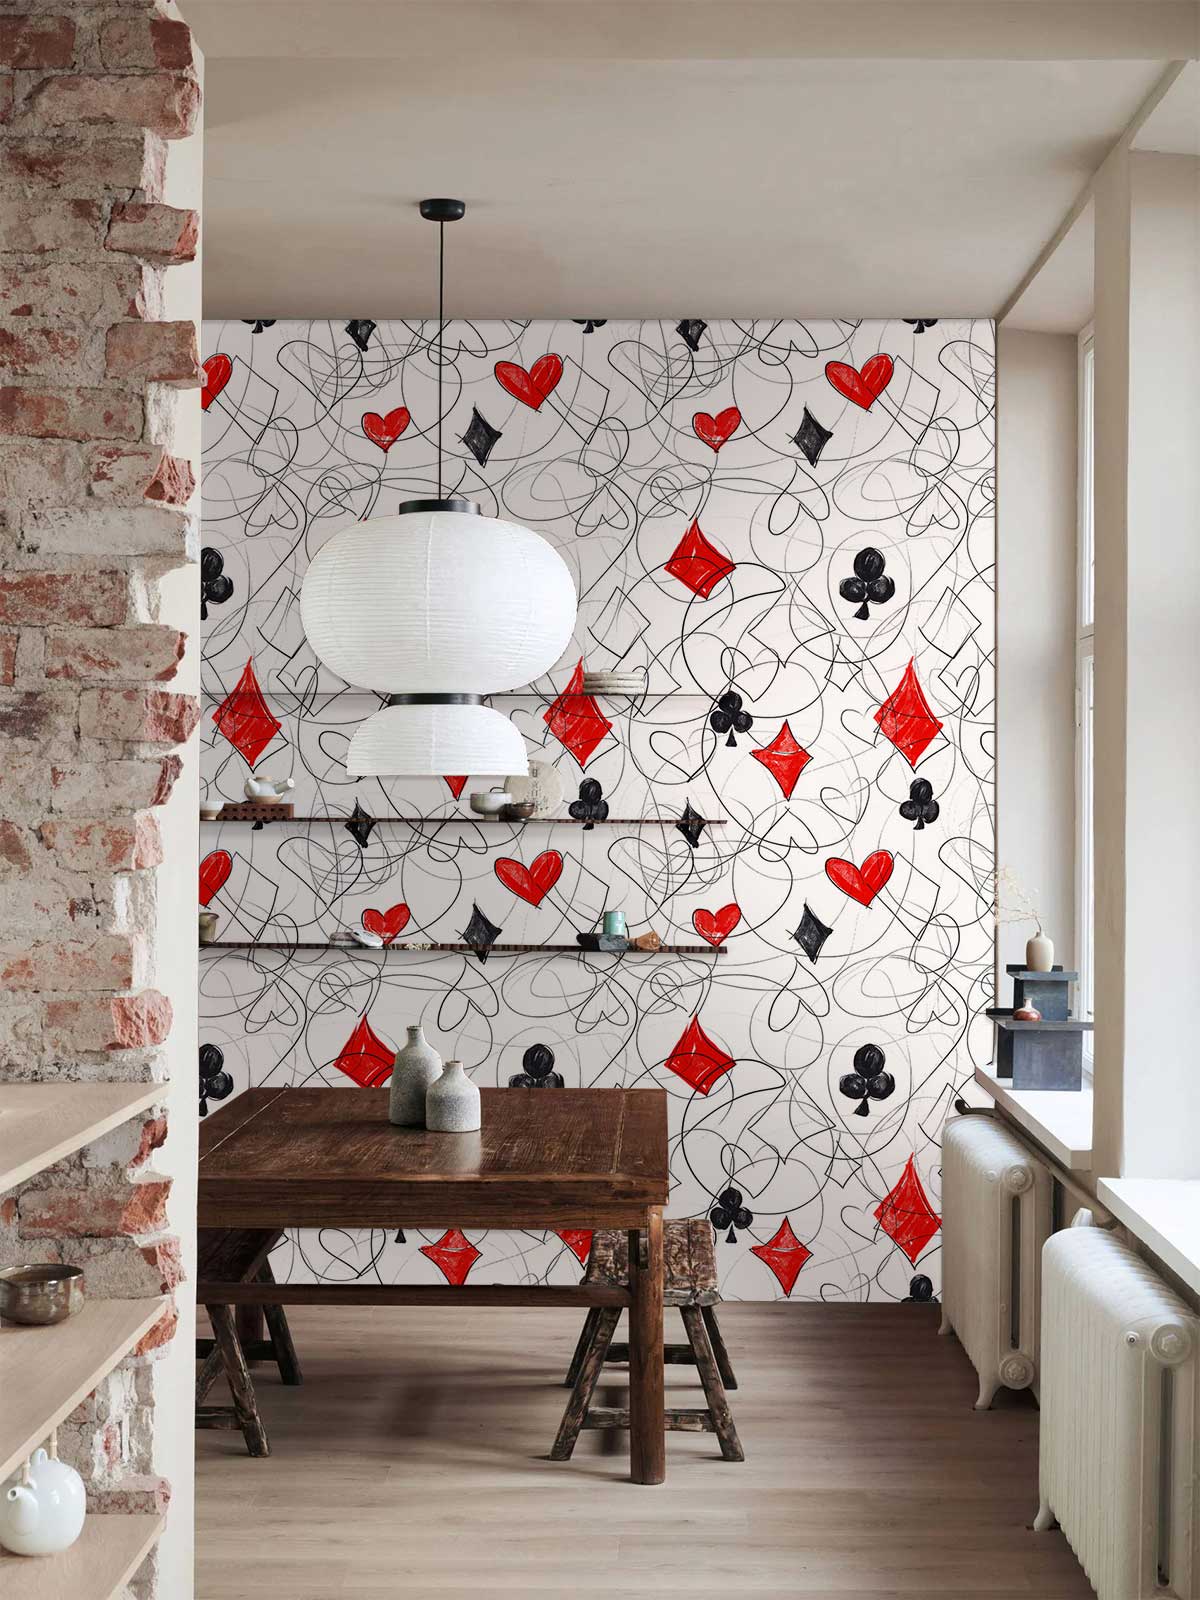 amzaing design for wall decorating with poker